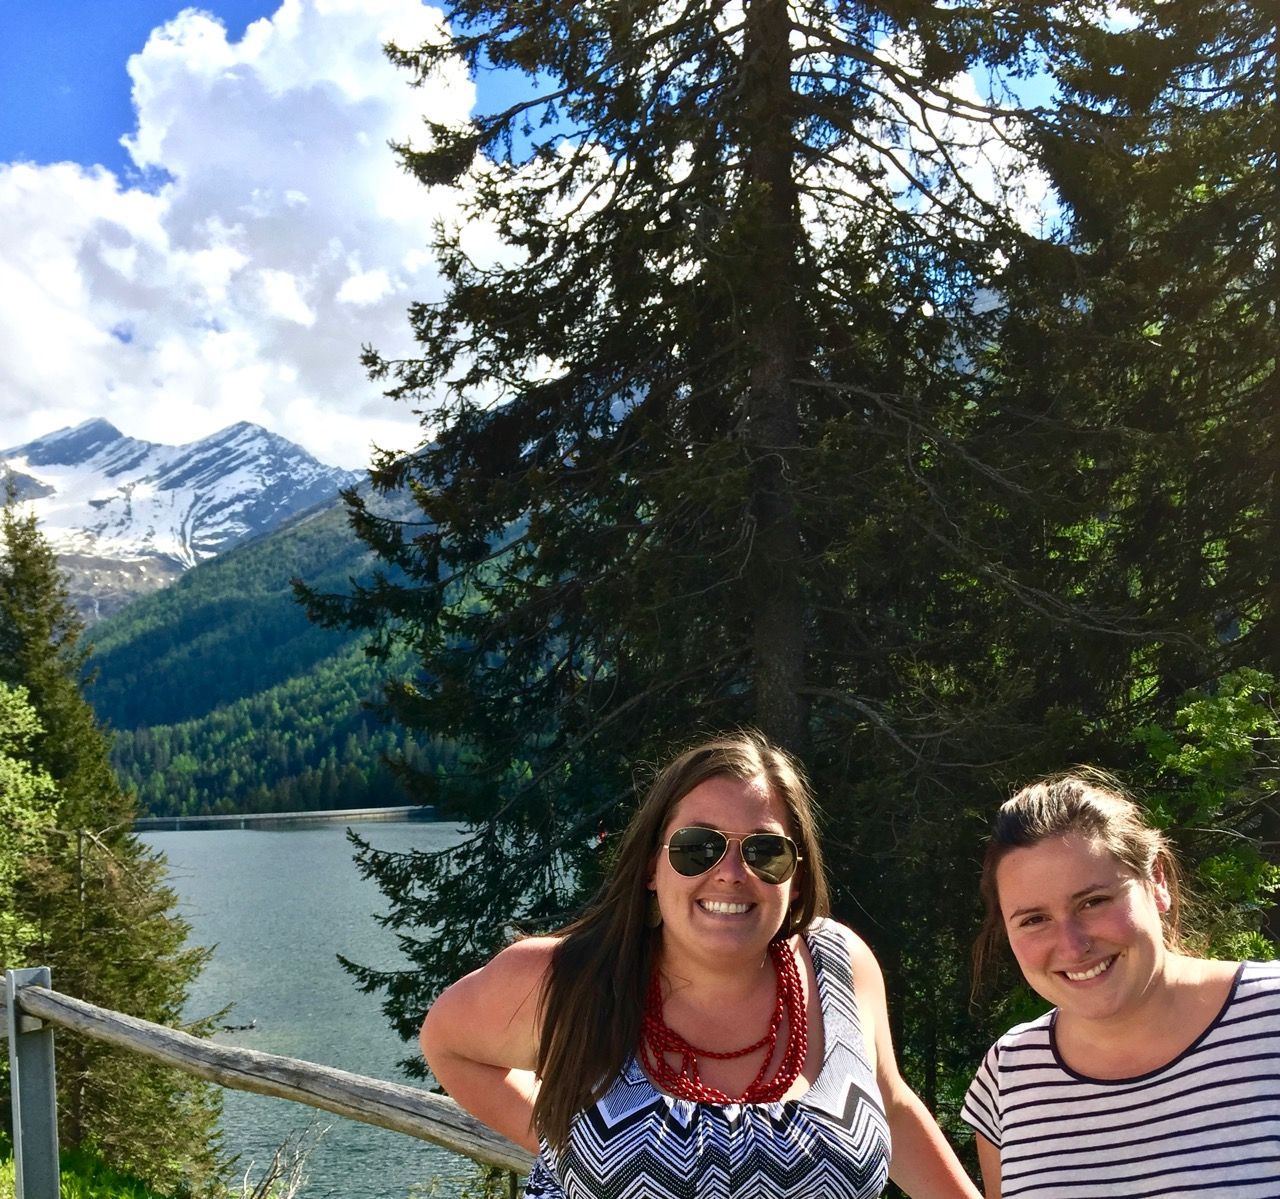 Two women smiling with a lake in the background.